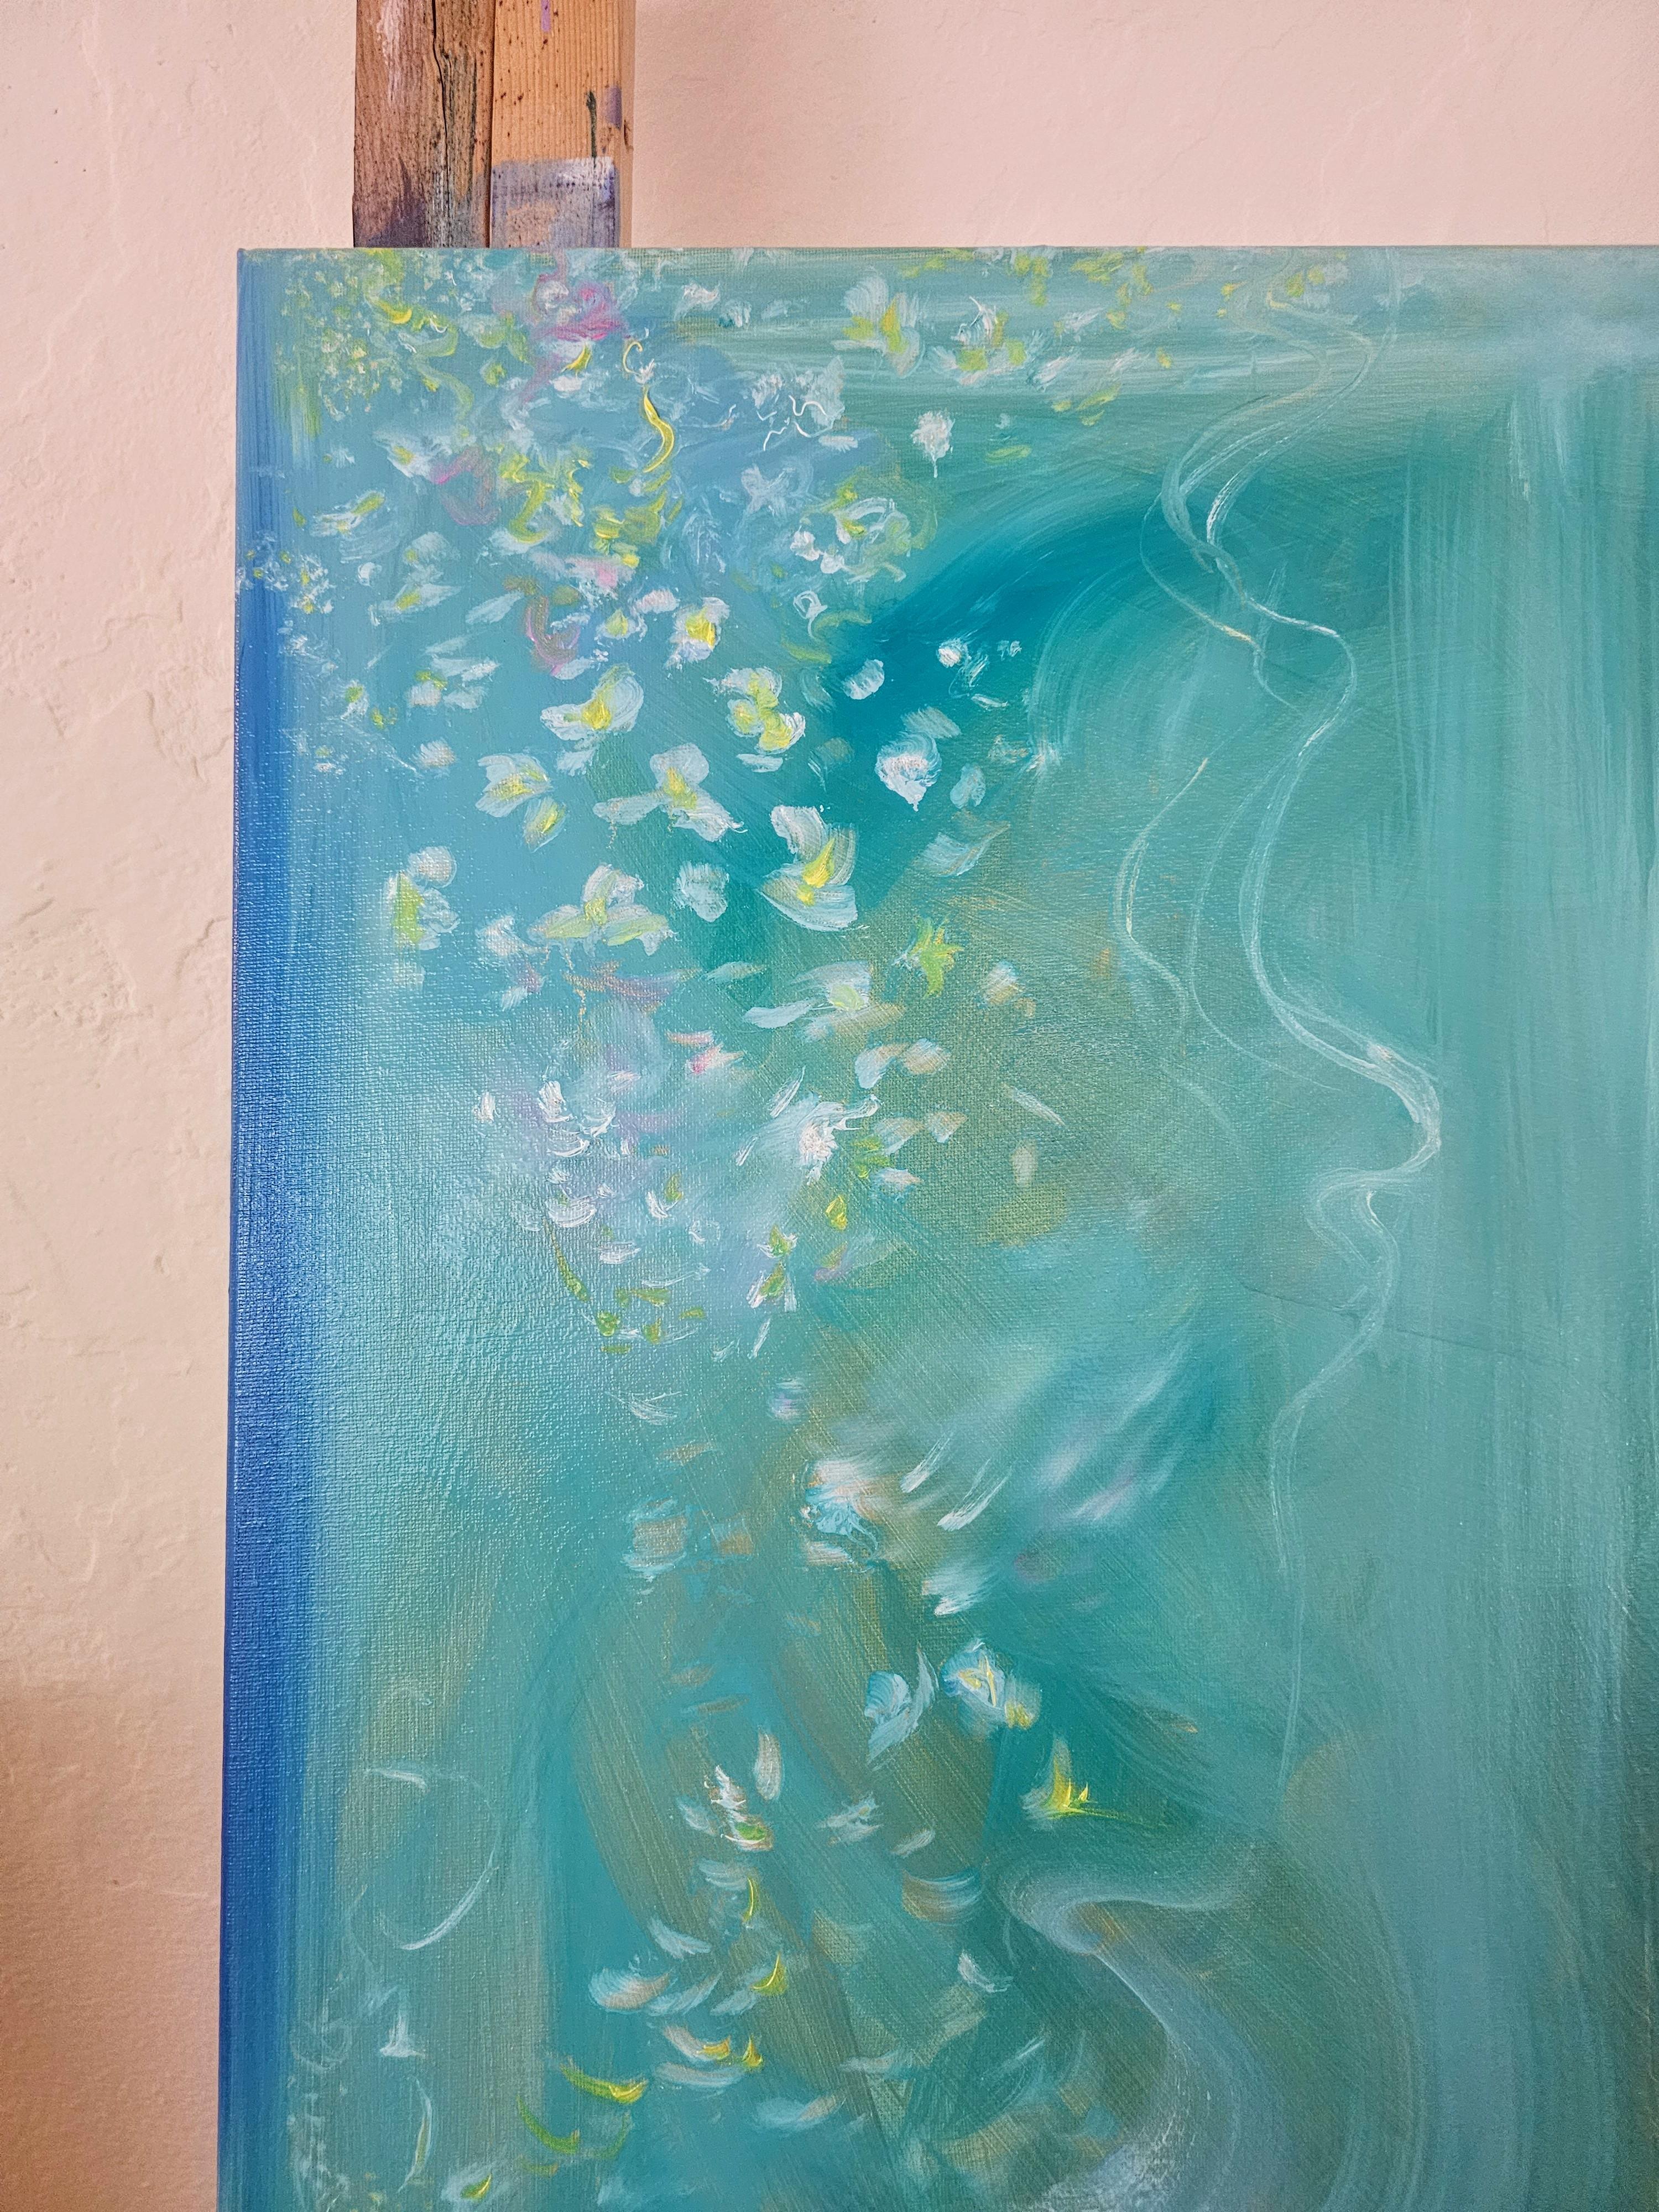 In creating this artwork, I've unleashed a whirlpool of emotions, channeling the serene yet dynamic essence of the ocean. With oil as my medium, I danced between abstraction and impressionism—capturing not just a scene but a feeling. Swirls of